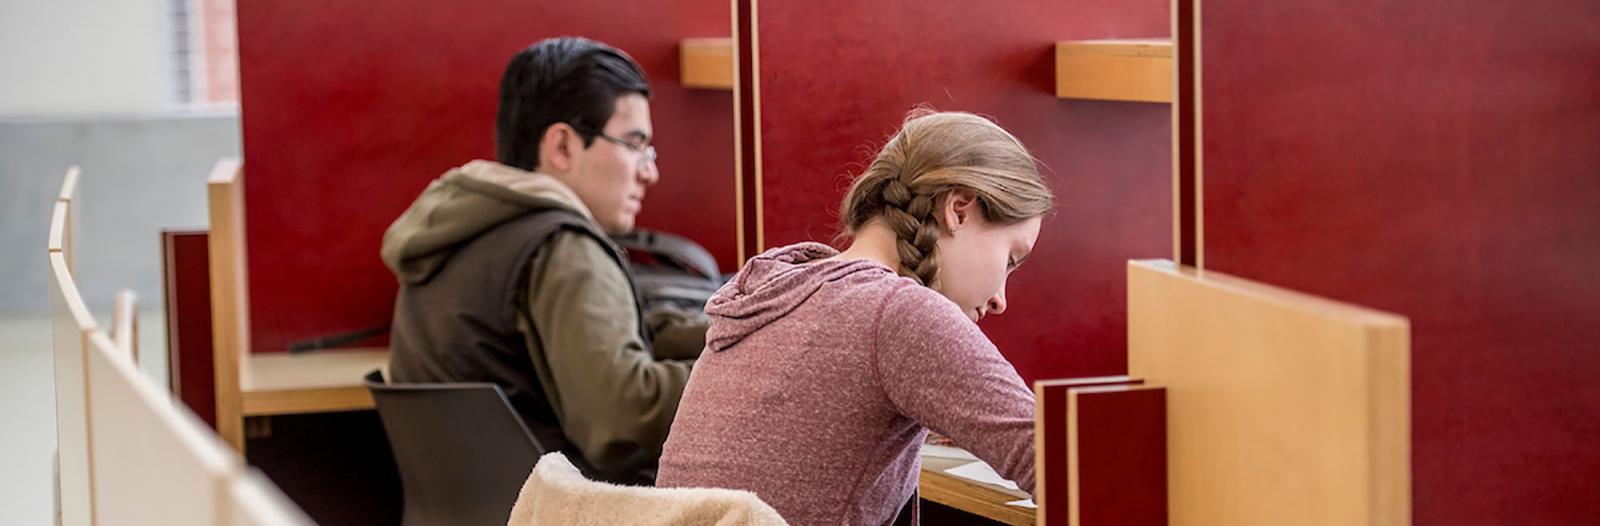 two students in study carrels